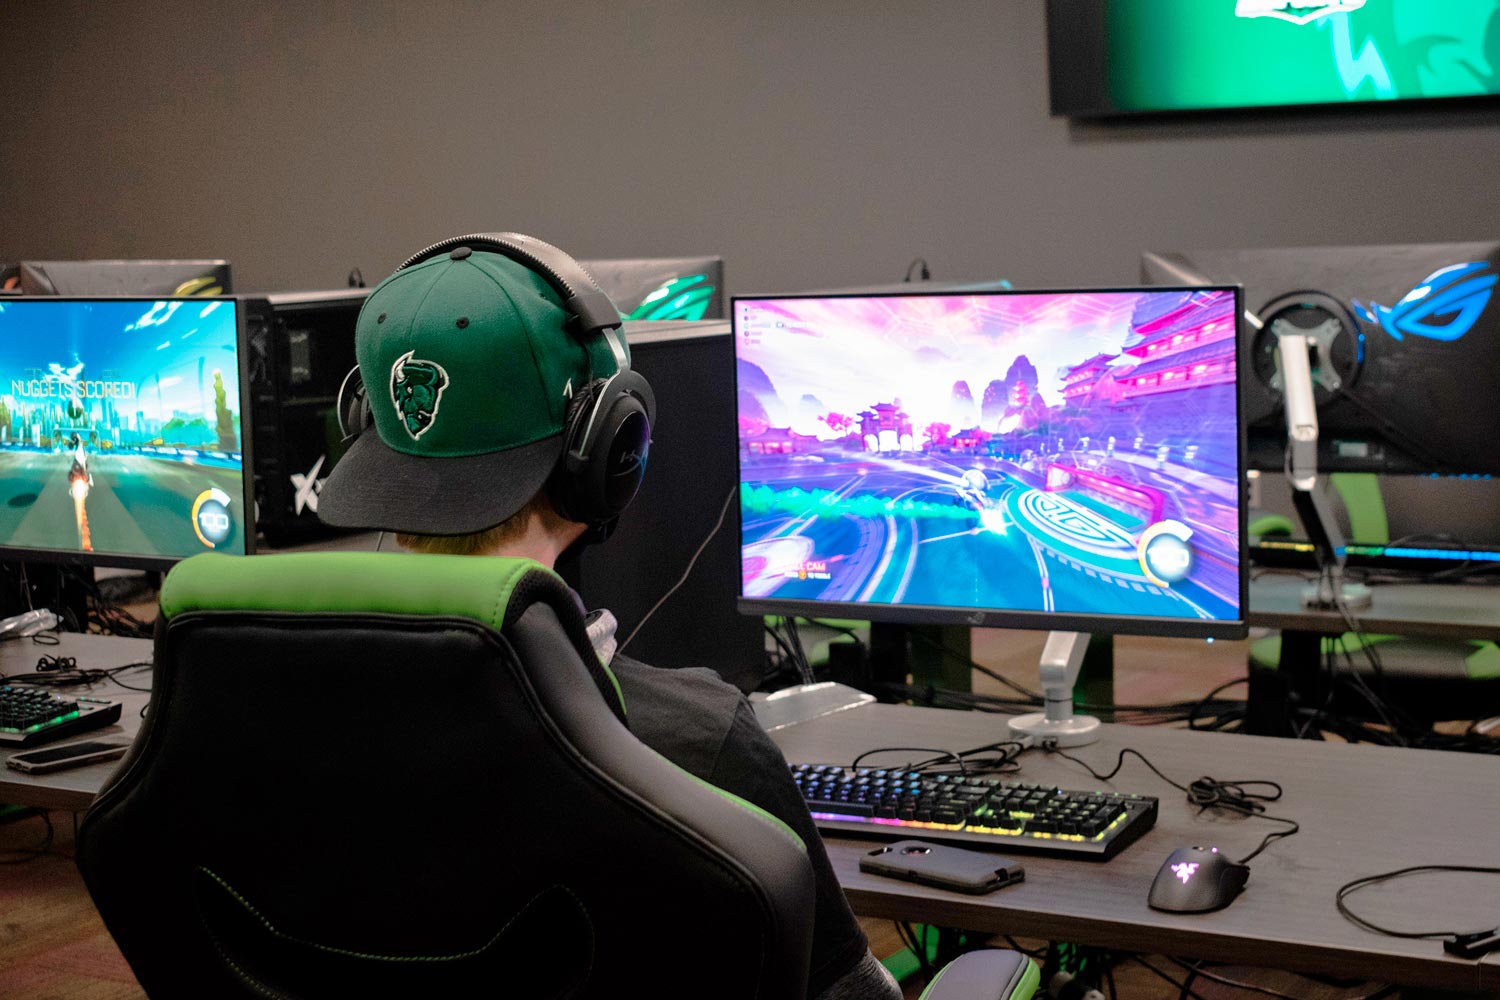 The esports training room includes 16 high-powered gaming stations with 27” HDR gaming monitors. Signals from any gaming station can be routed to the wall-mounted large screen displays and the SMP 111 streaming media processor.